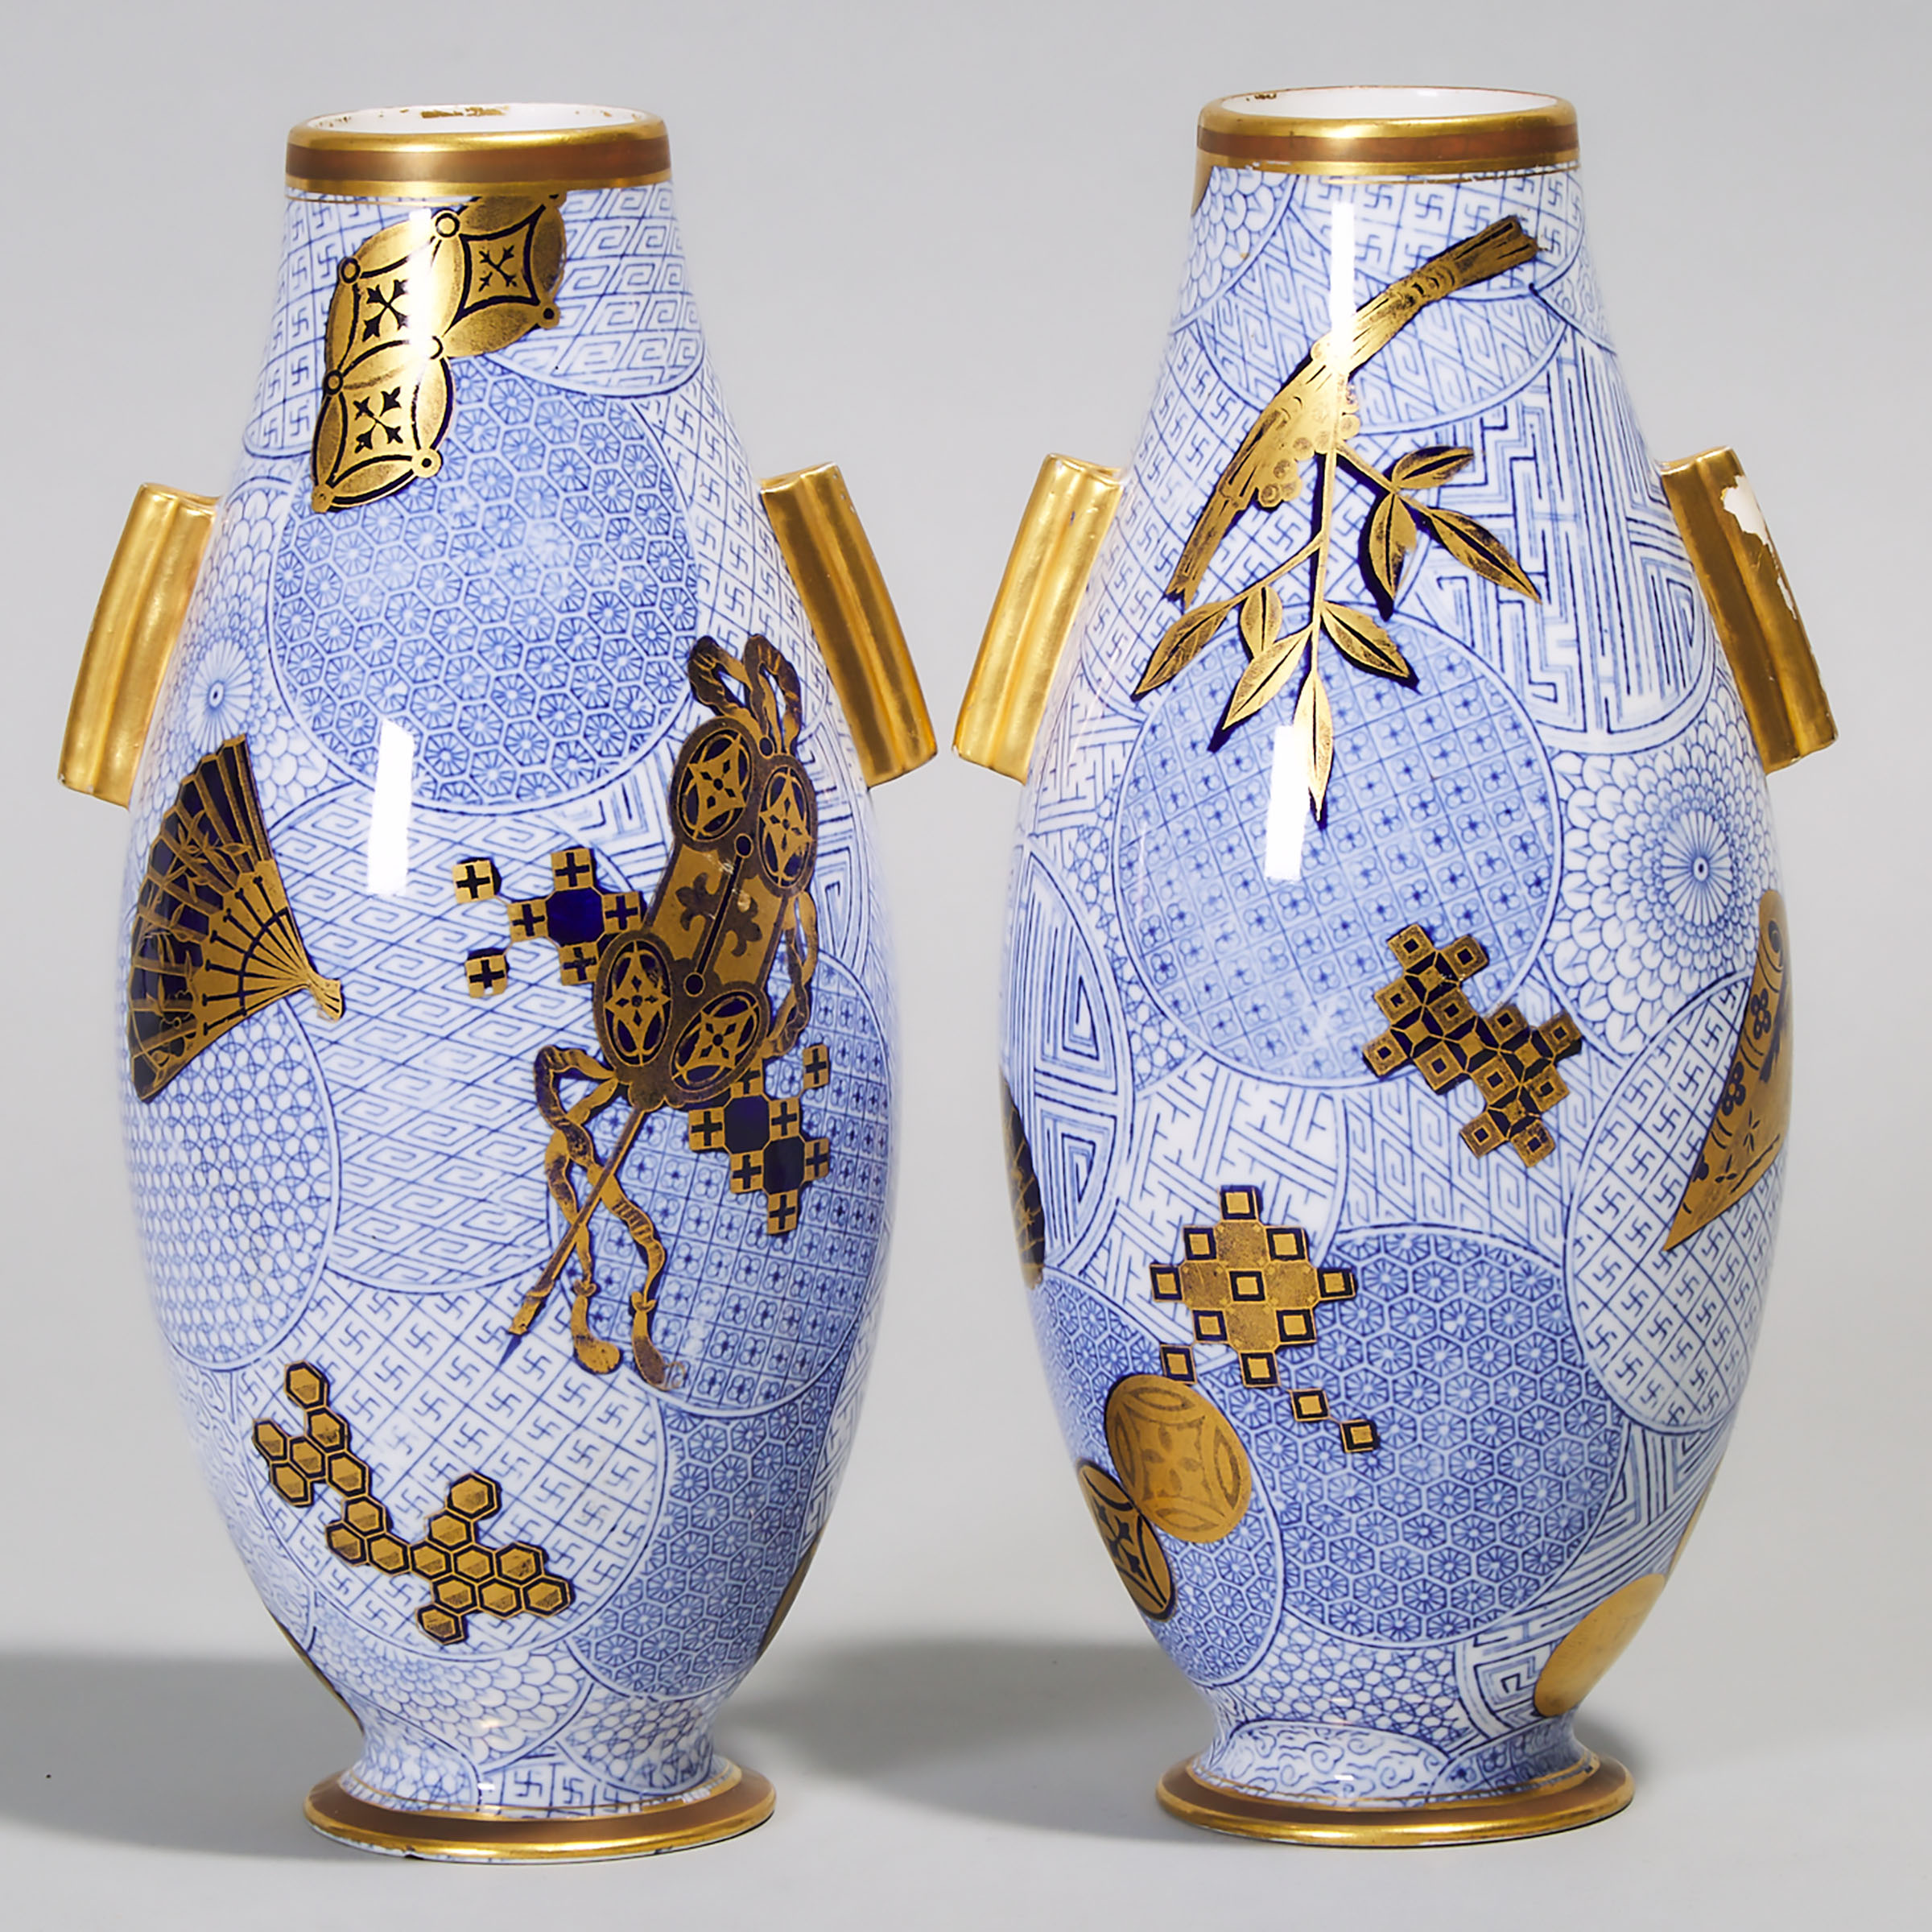 Pair of Royal Worcester Blue and Gilt Japanese-Style Vases, 1877